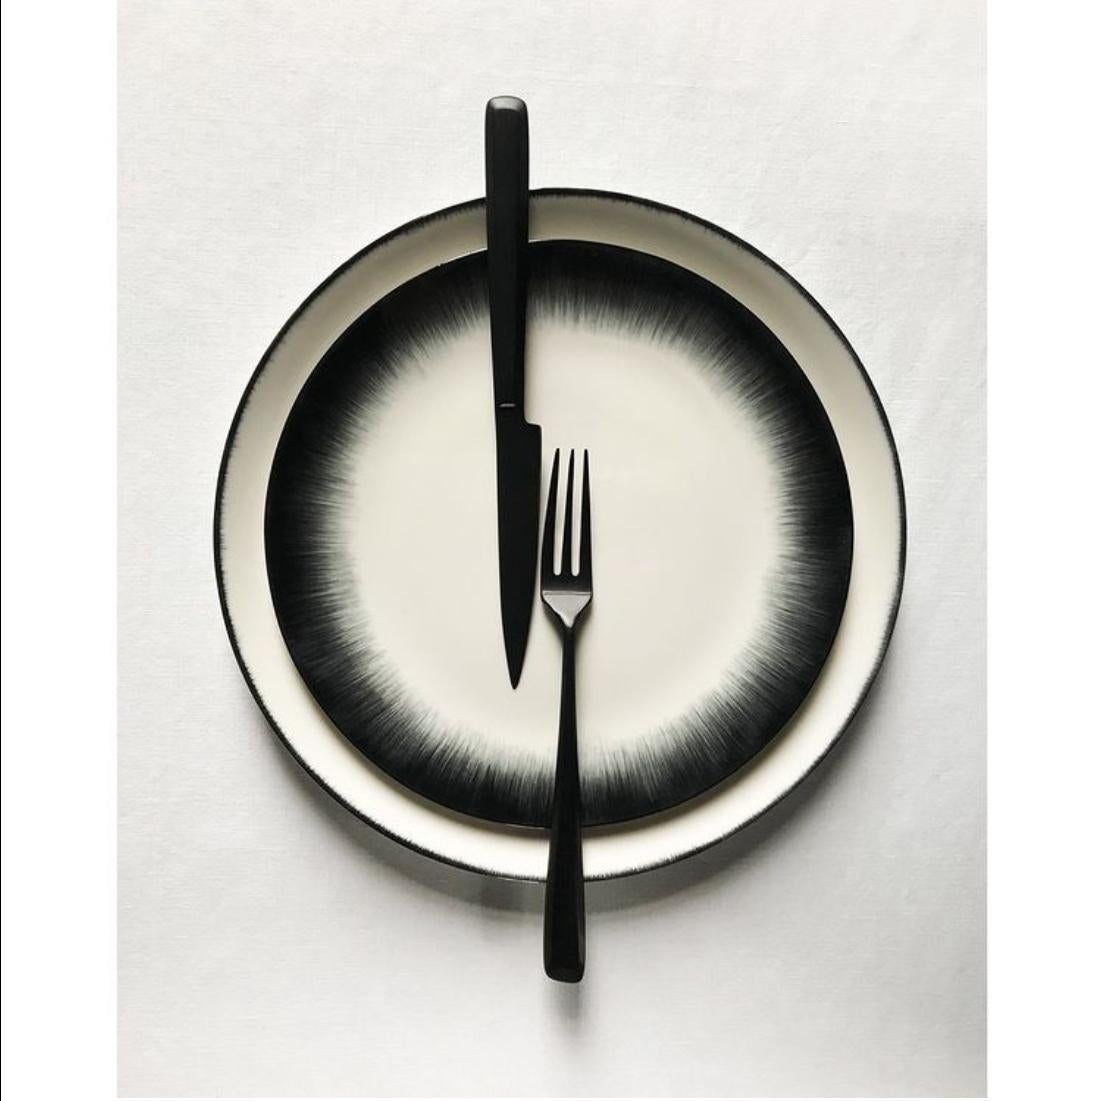 Ann Demeulemeester for Serax 17.5 cm plates (set of two) In New Condition For Sale In Laguna Beach, CA